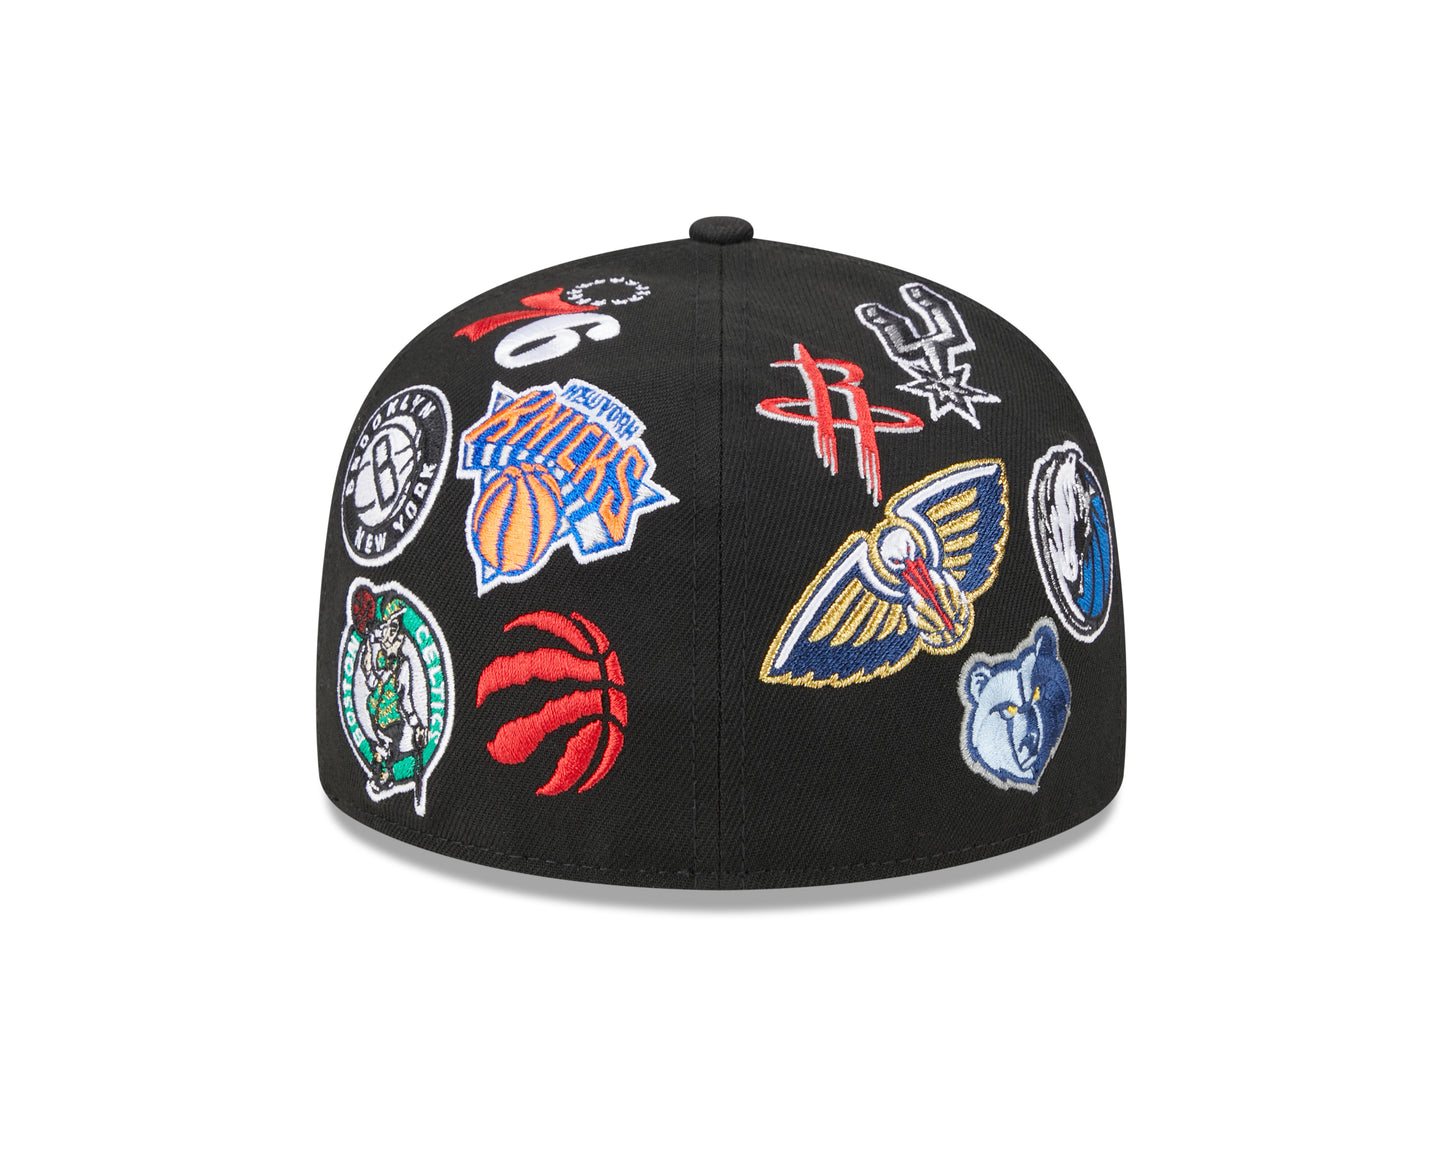 New Era - 59Fifty Fitted NBA  All Star Game 24 - Black - Headz Up 